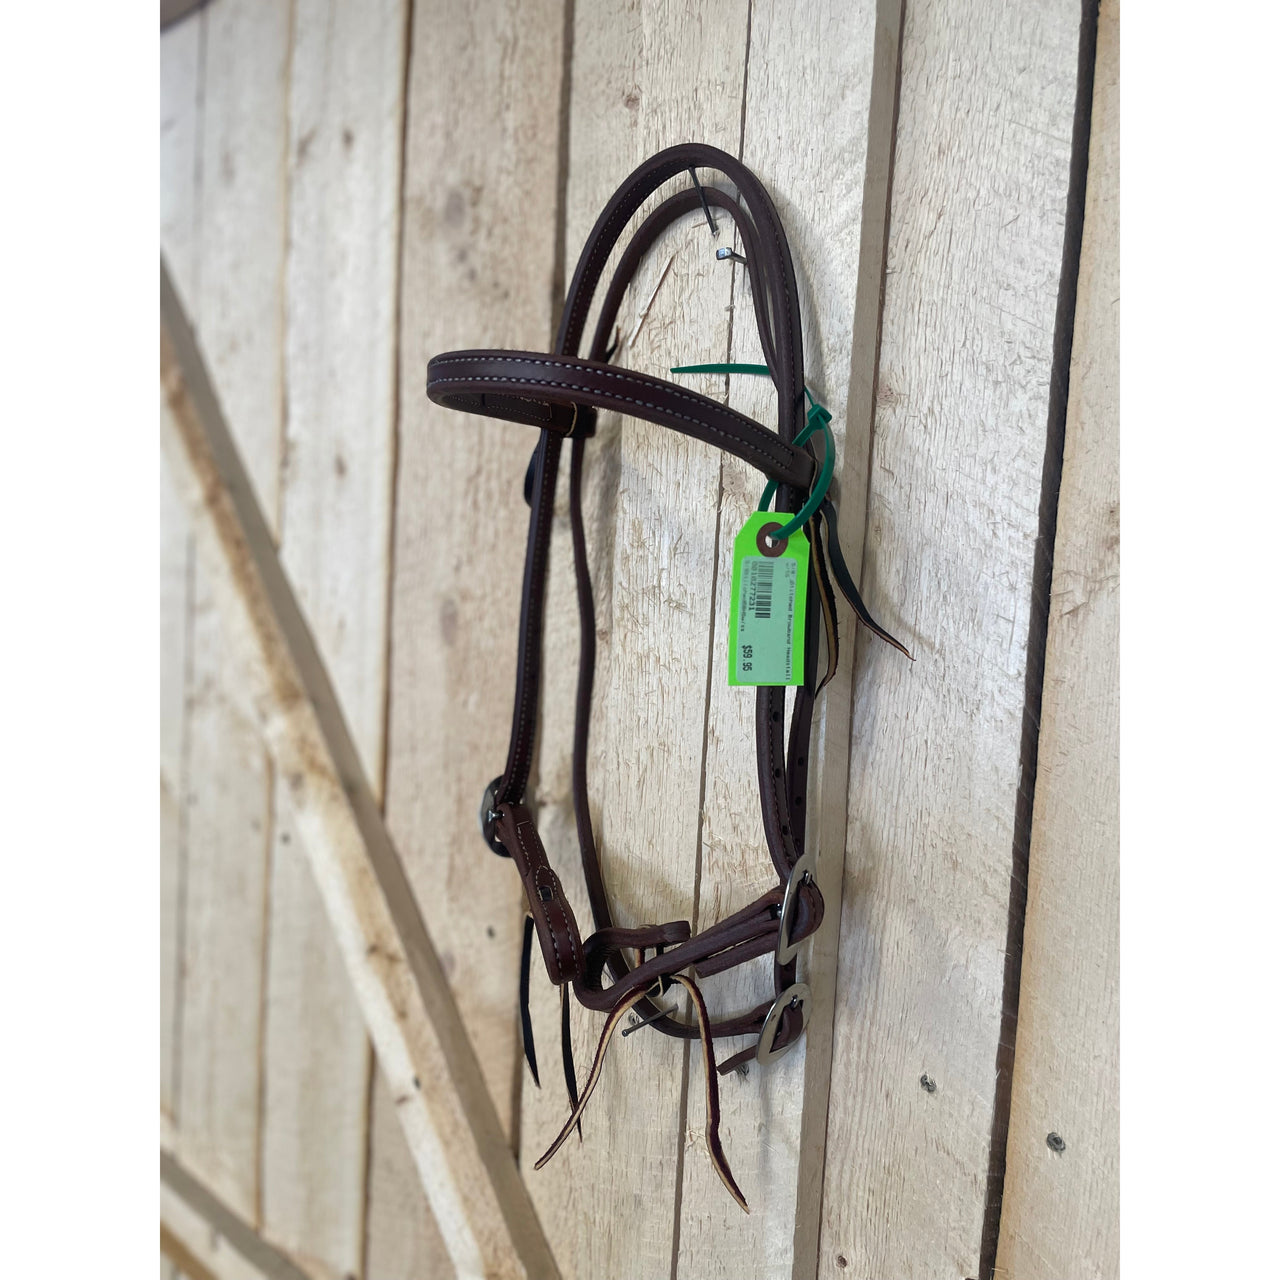 Irvine 5/8" Stitched Browband Headstall w/Stainless Steel Hardware - Dark Oil